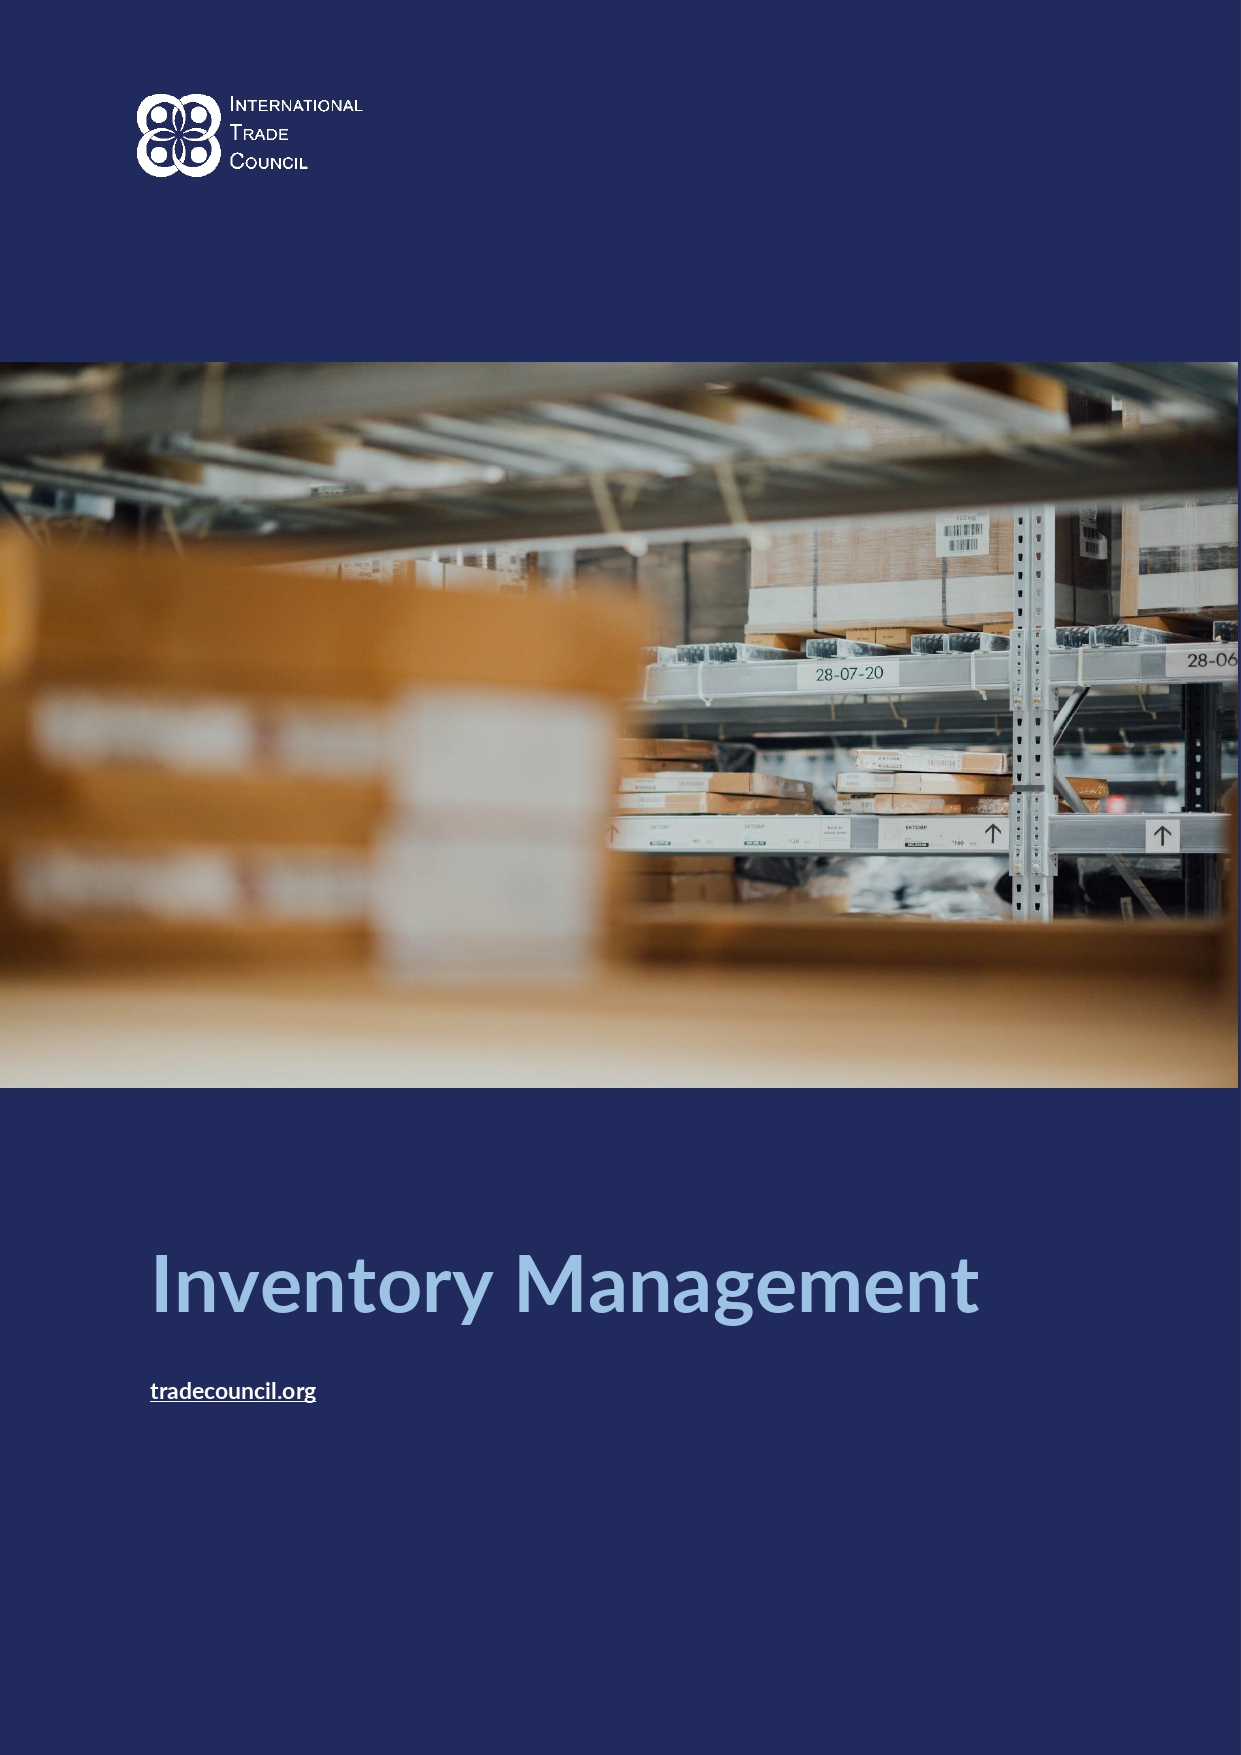 Inventory Management from the International Trade Council your international chamber of commerce.